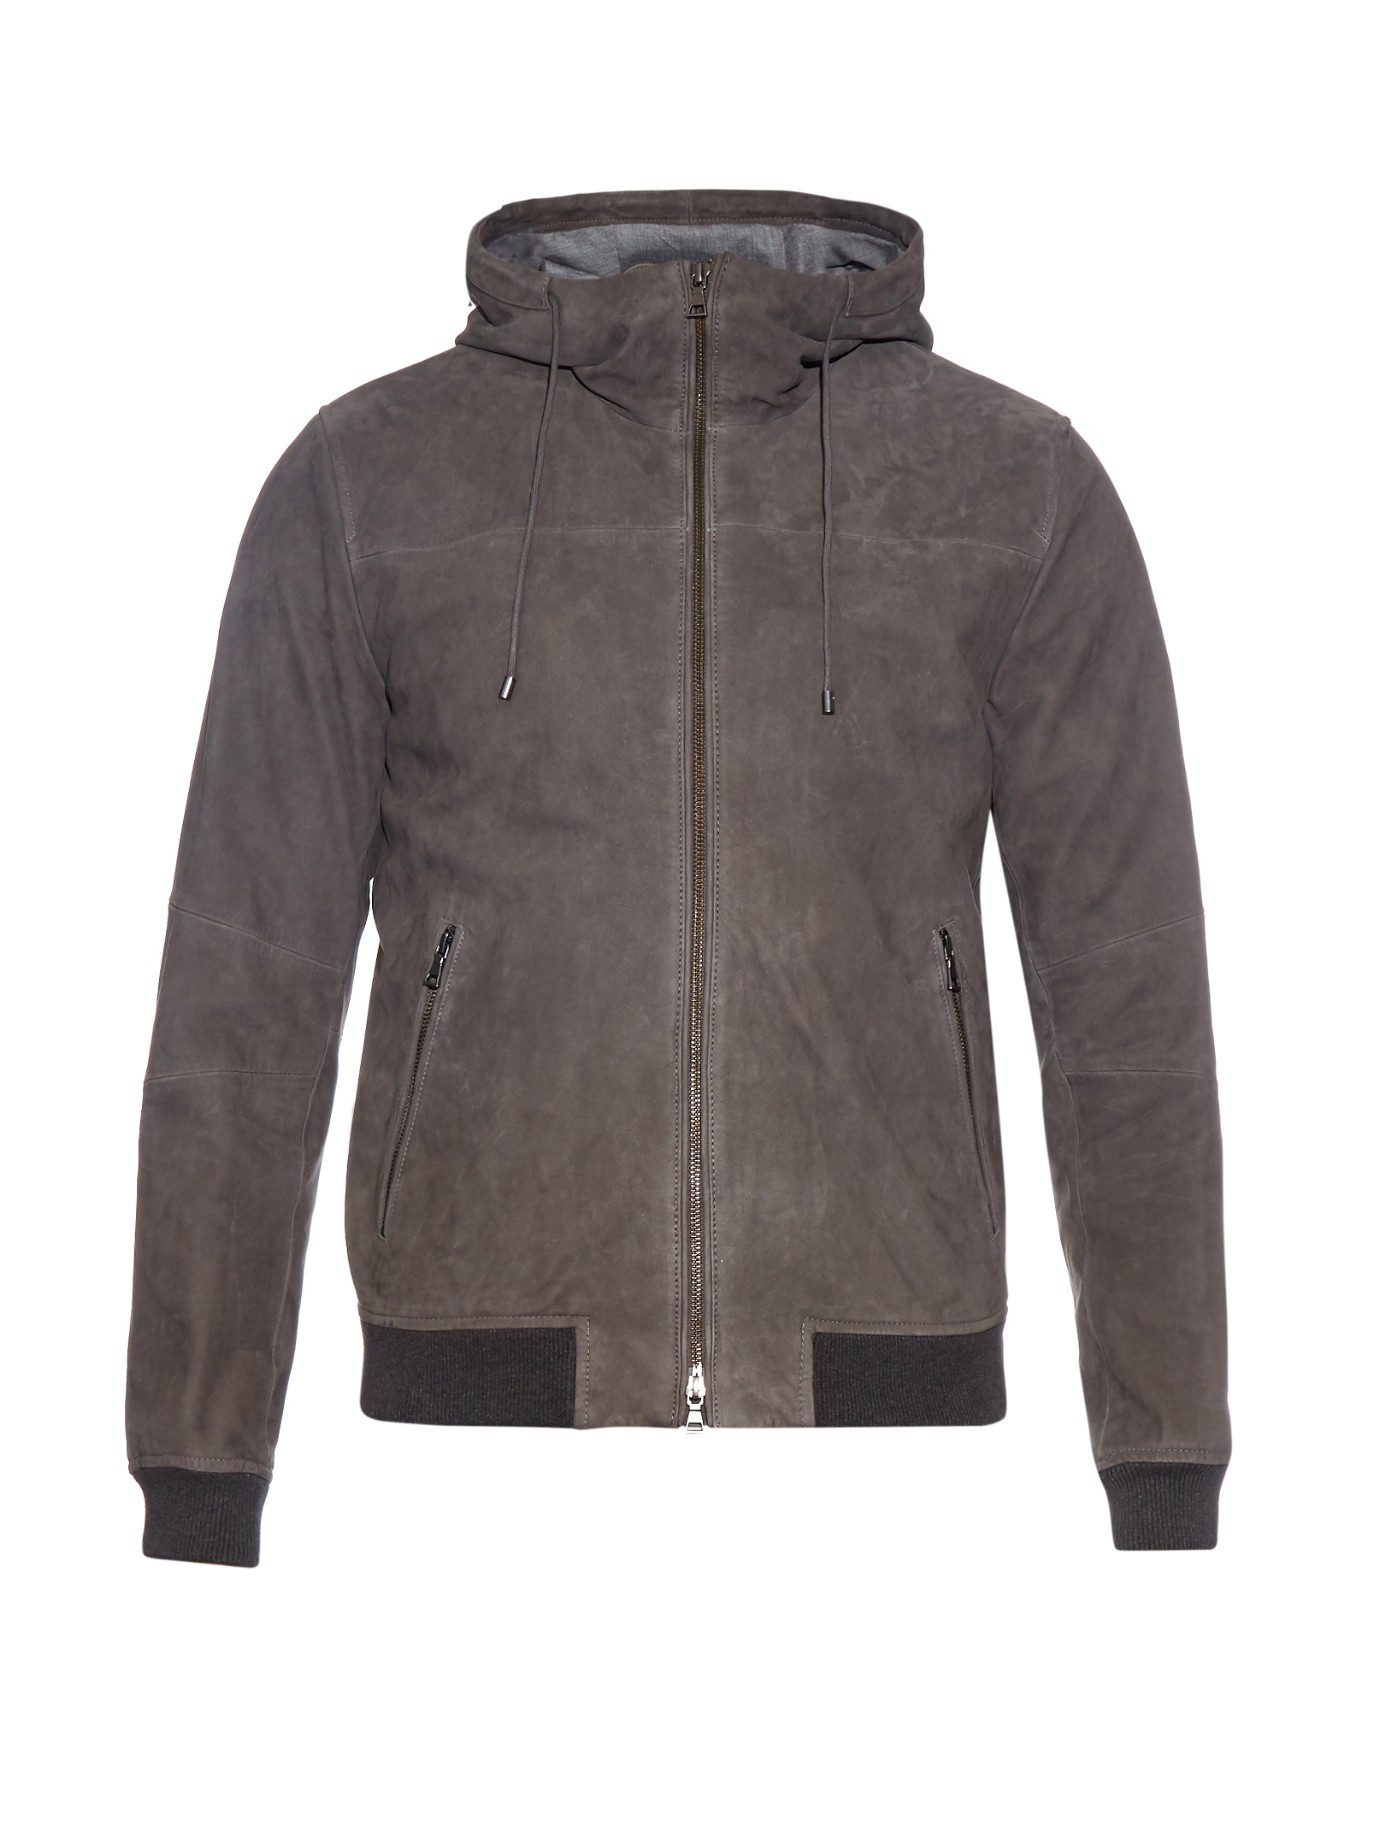 Vince Hooded Suede Jacket in Grey (Gray) for Men - Lyst